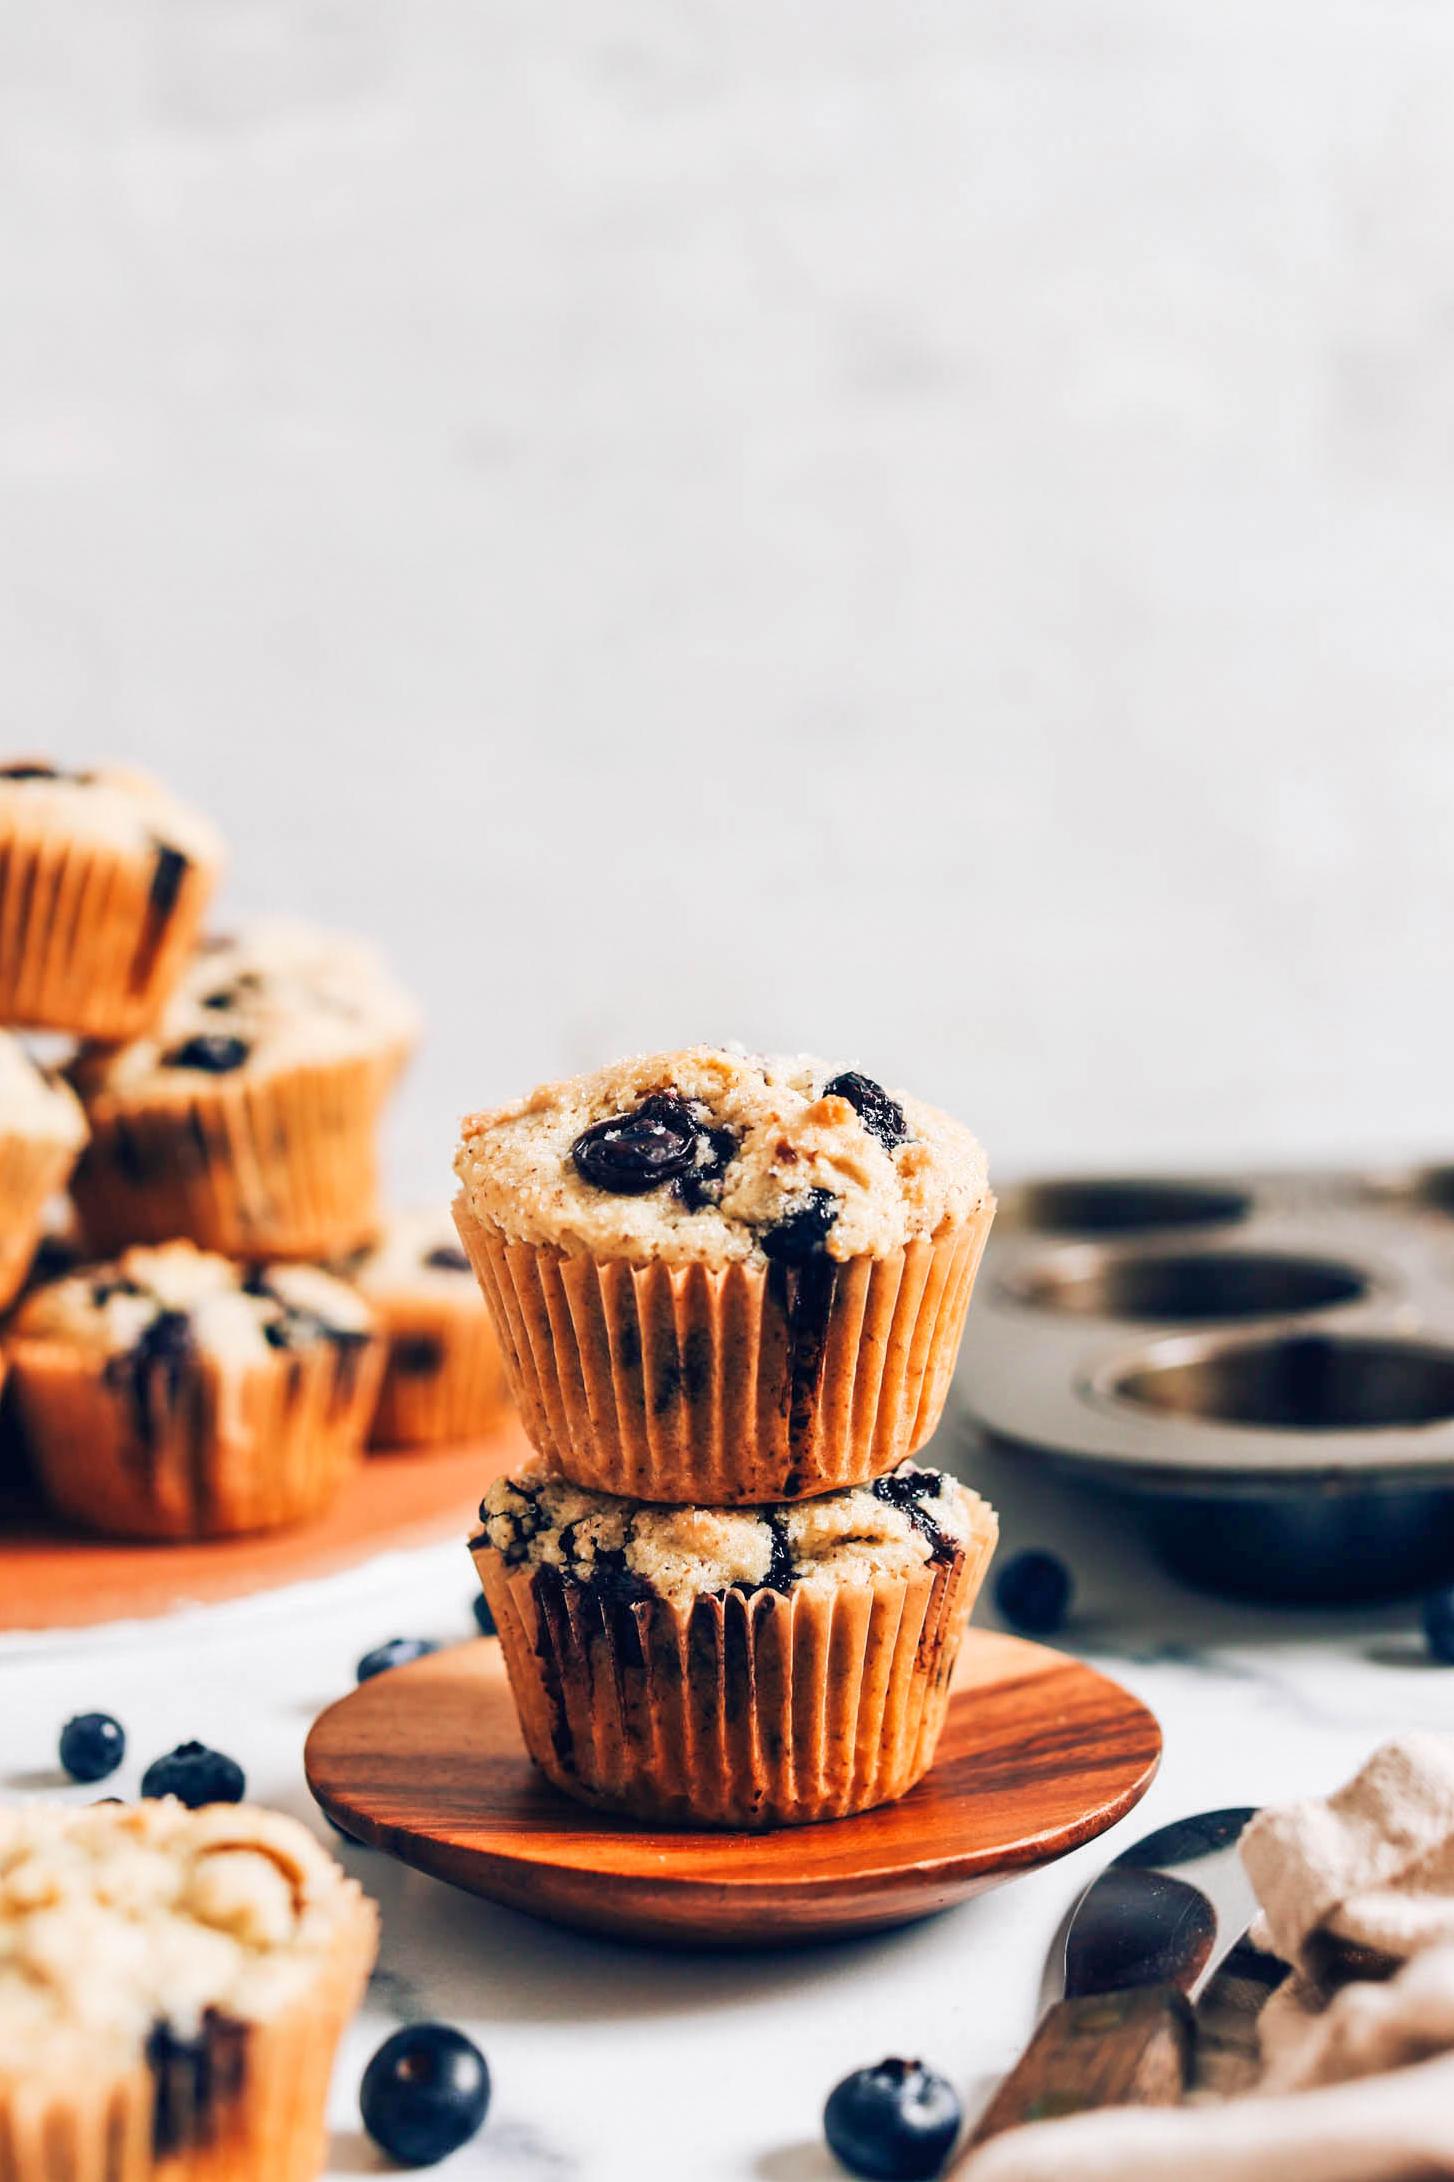  You won’t believe these muffins are gluten-free!